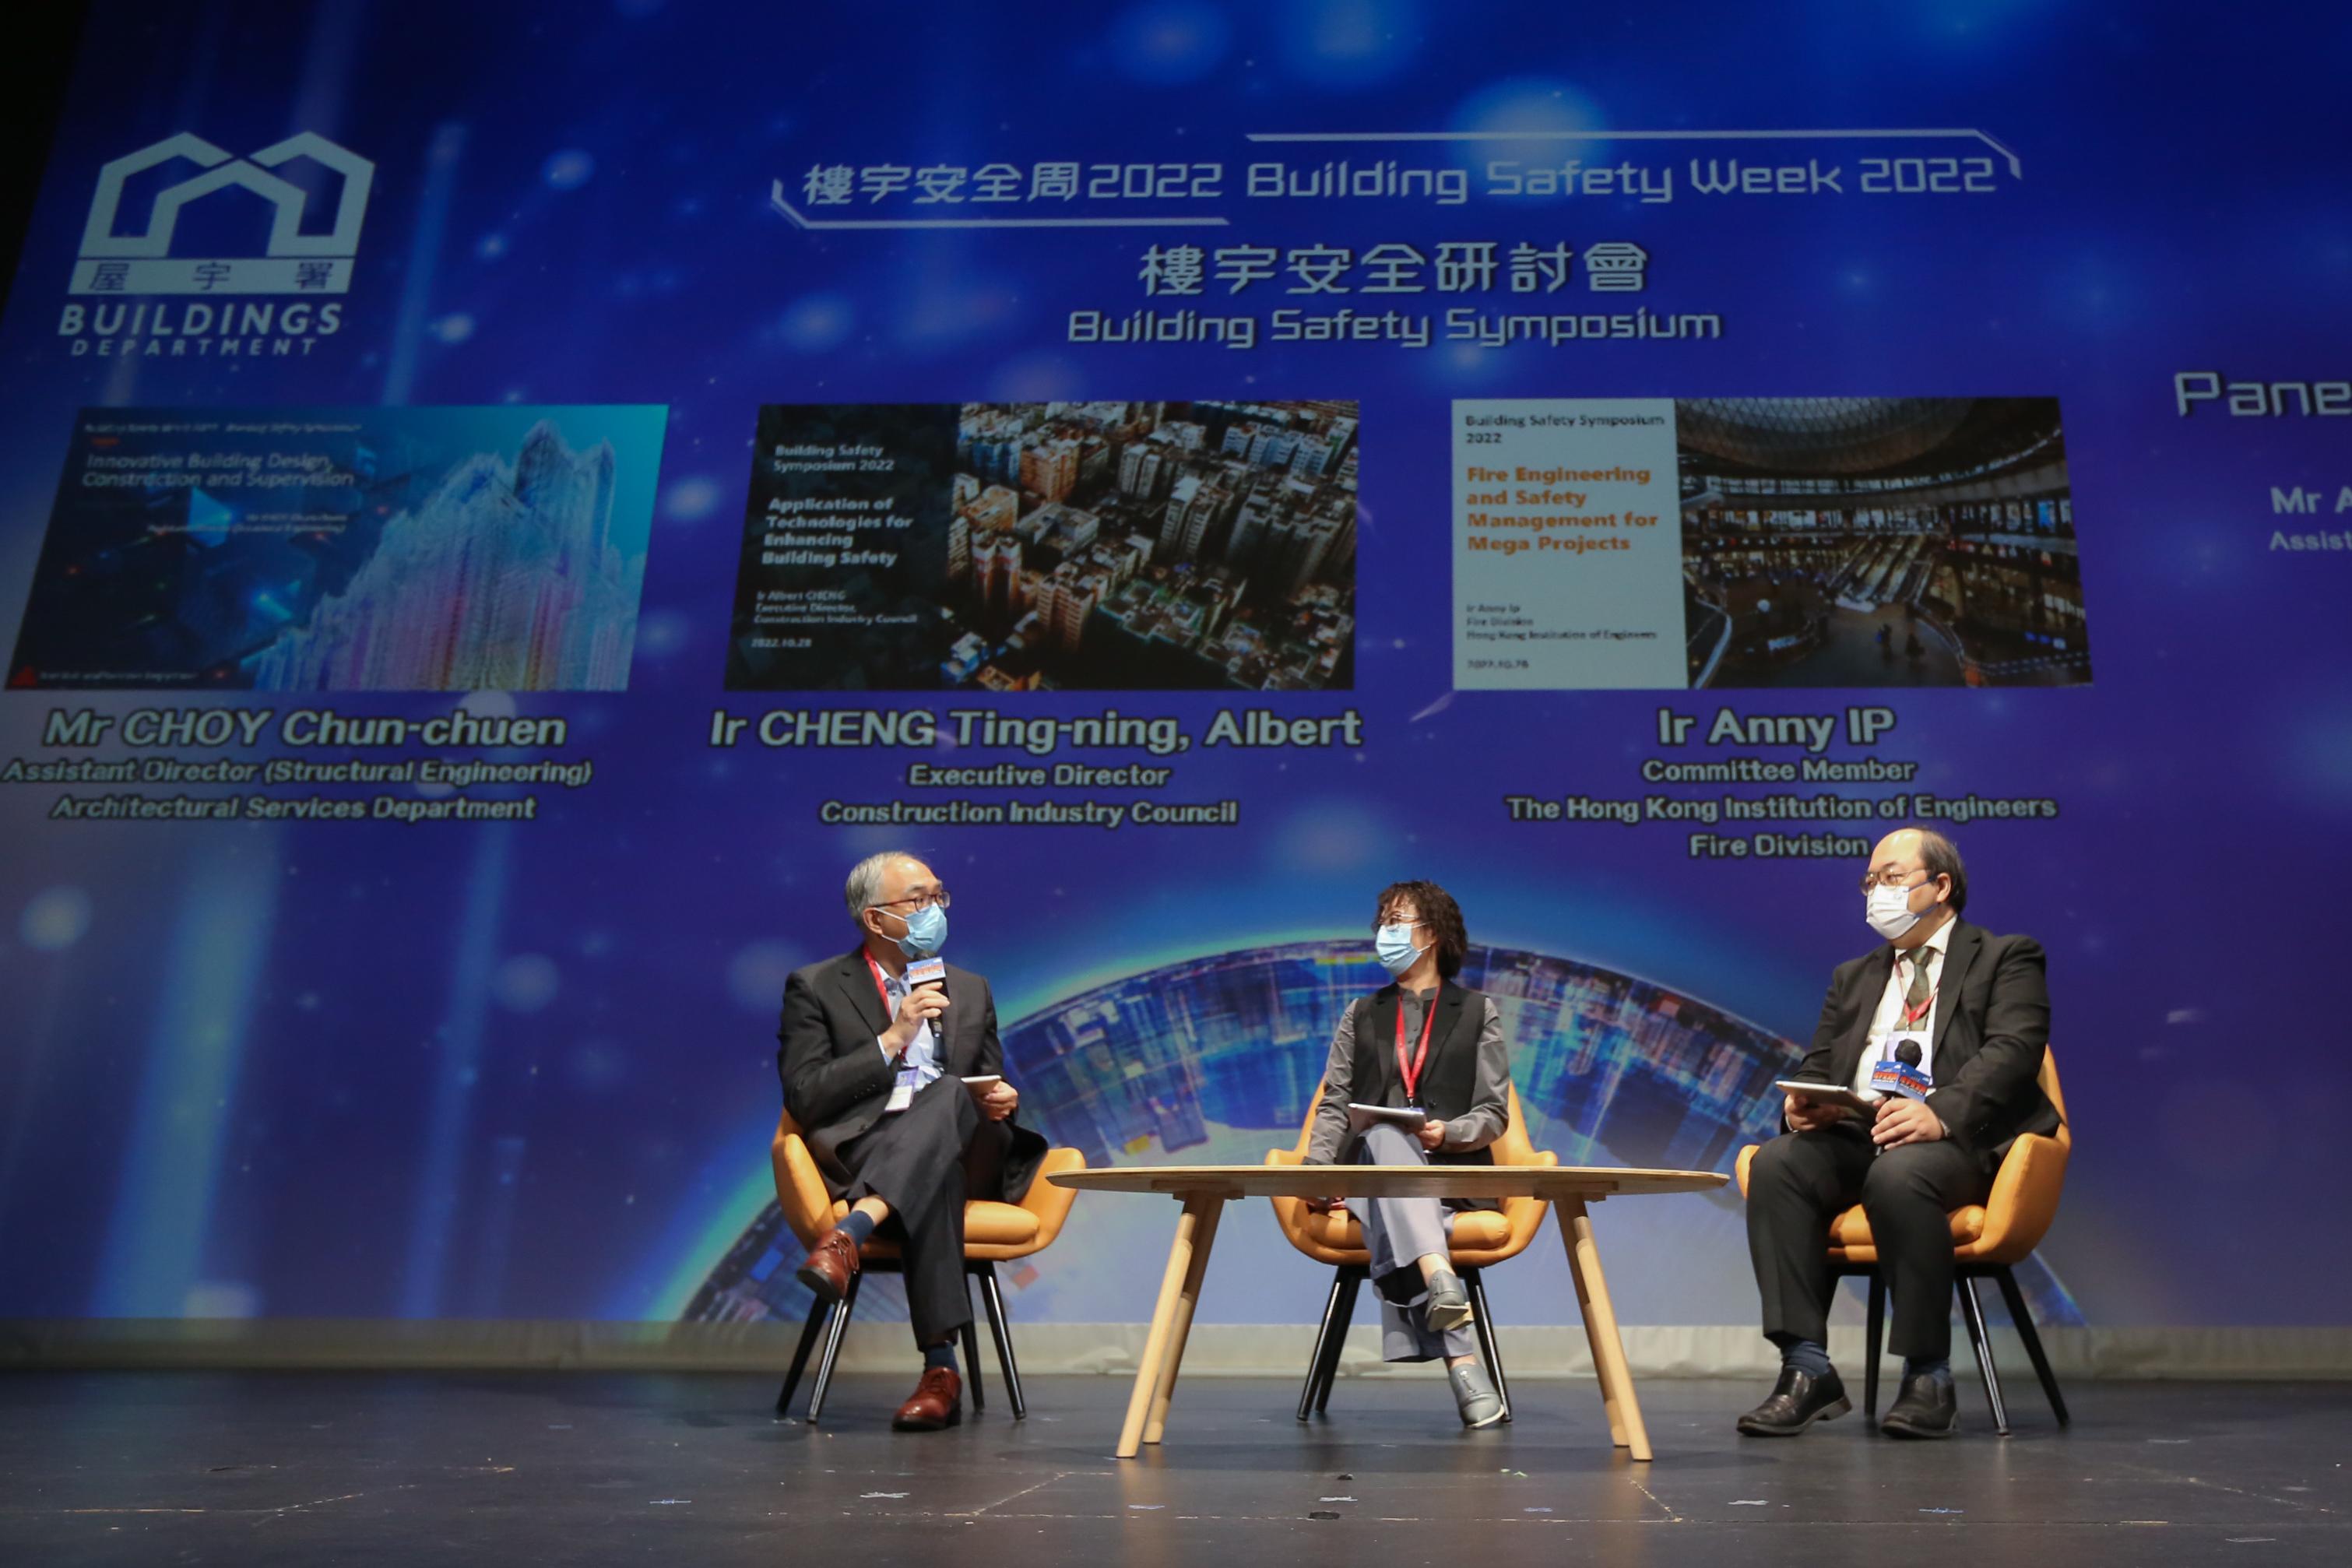 The Buildings Department held the closing event of Building Safety Week 2022, the Building Safety Symposium, at the Xiqu Centre today (October 28). Building professionals, members of the building management sector, government officials and academics were invited to share experiences and exchange views on the topic of "Innovation and Technologies for Building Safety". Photo shows speakers participating in one of the panel discussions at the symposium.